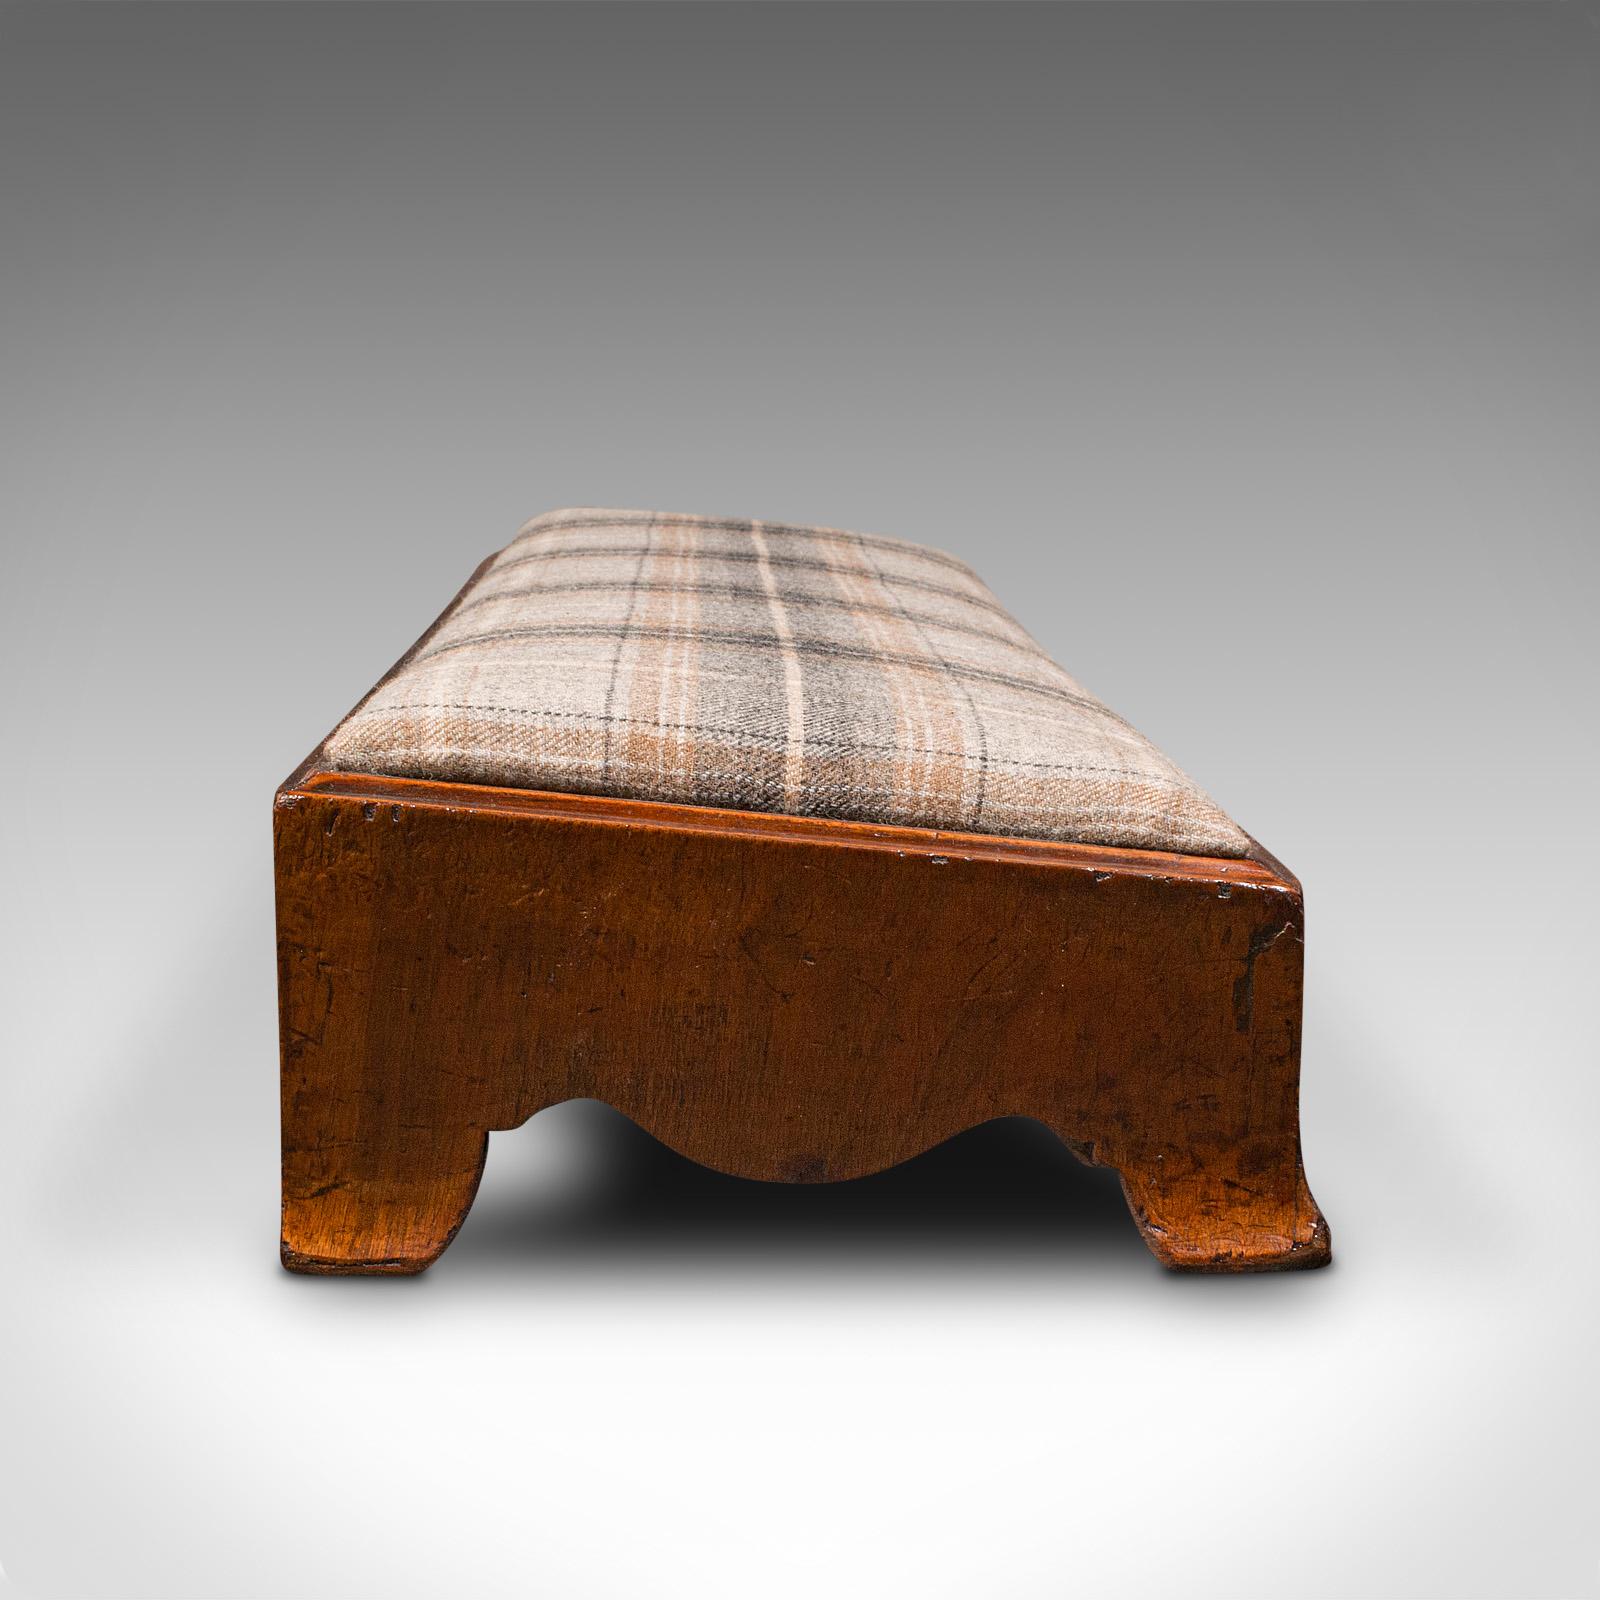 British Antique Carriage Stool, English, Tweed Upholstery, Fireside Rest, Georgian, 1780 For Sale